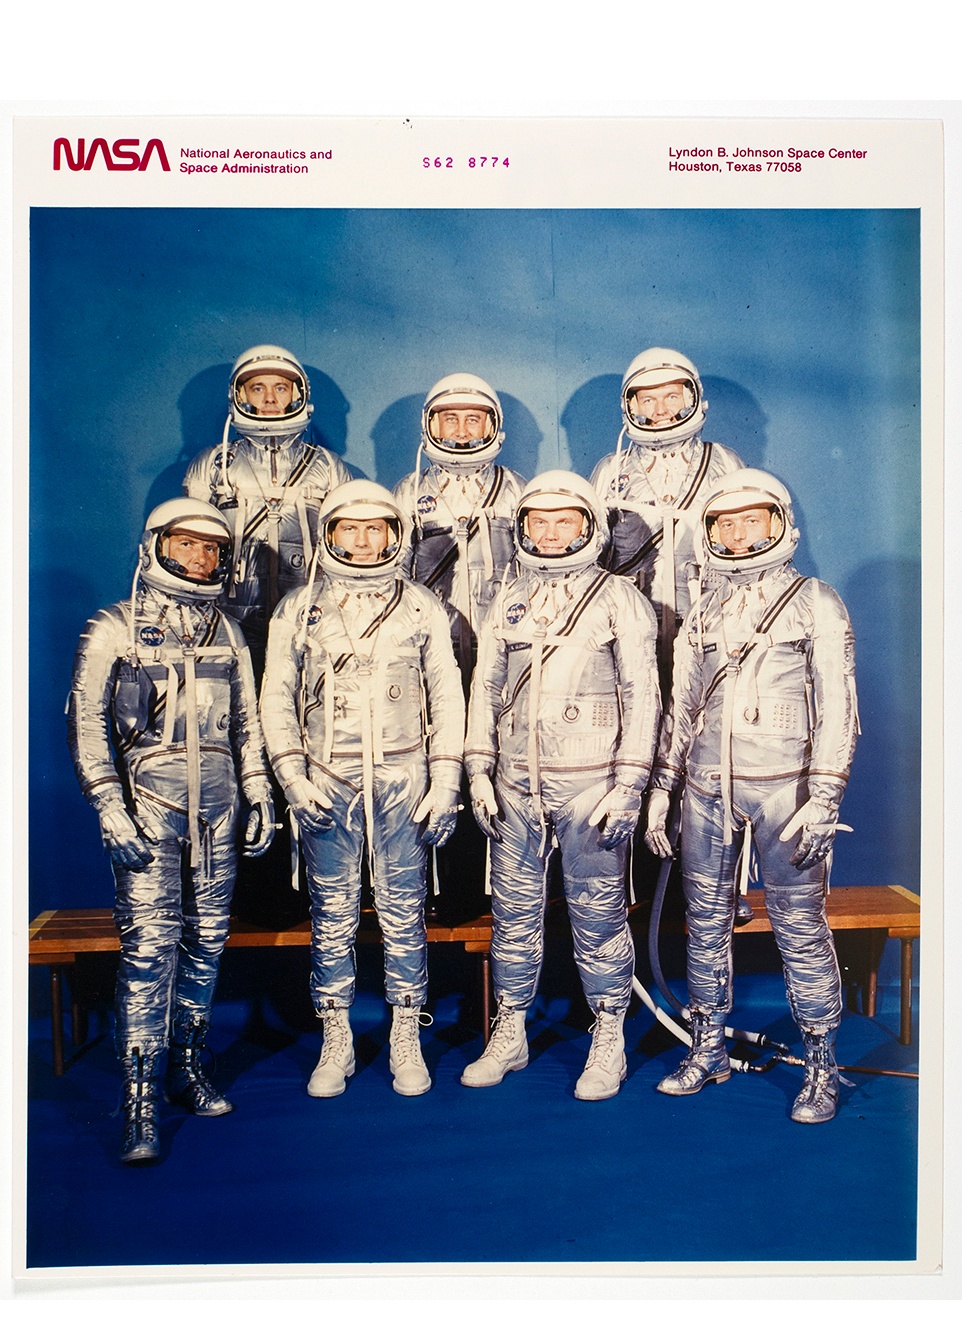 A group photograph of seven men in shiny silver space suits pose for a portrait in front of a blue background.